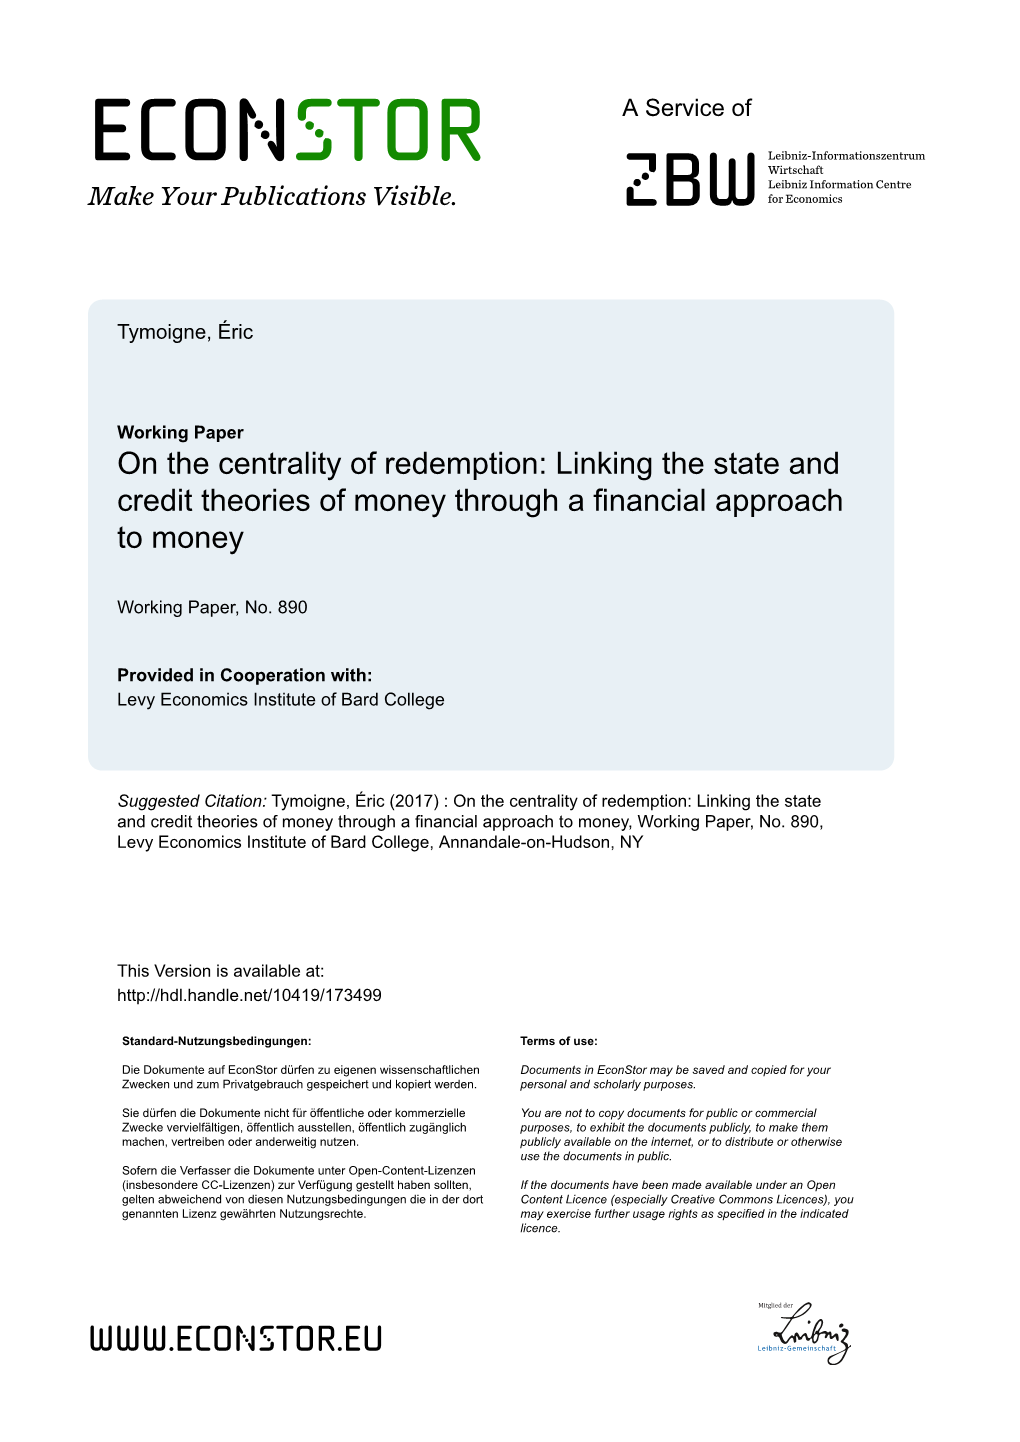 Linking the State and Credit Theories of Money Through a Financial Approach to Money